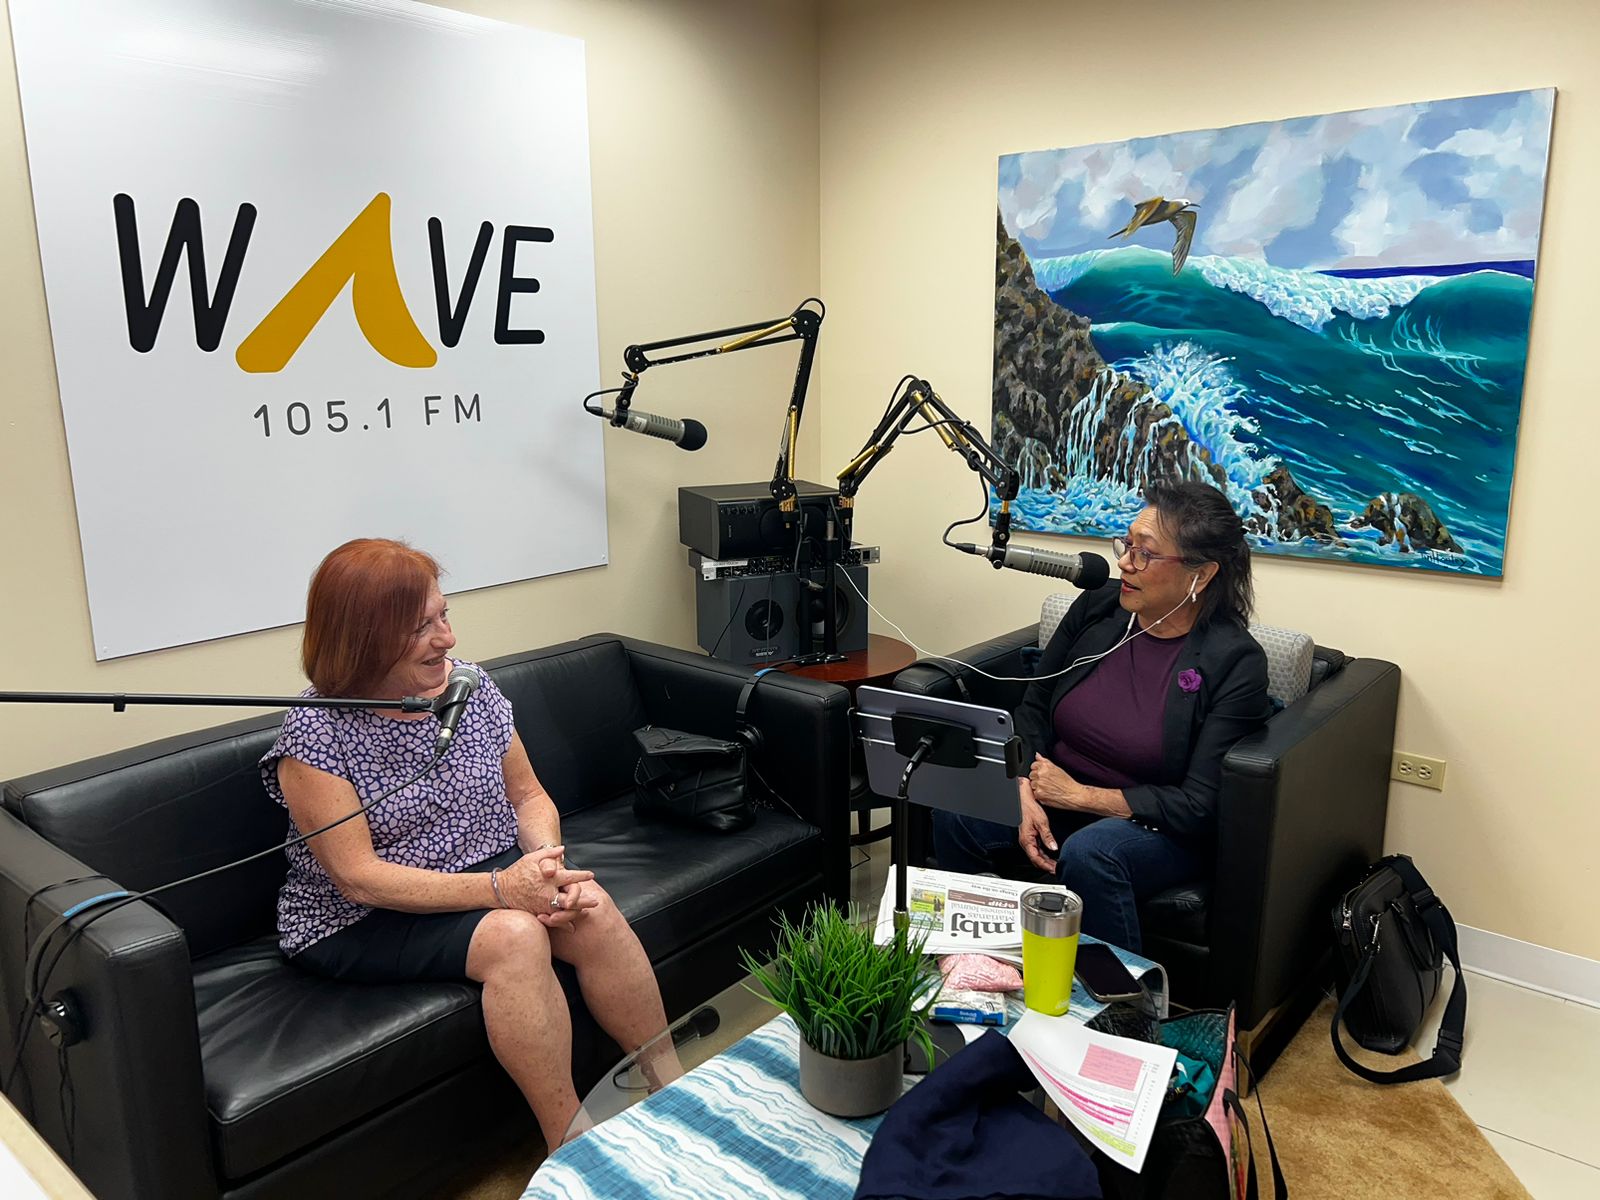 Business Bites premieres on Mornings with Patti on Wave 105 FM